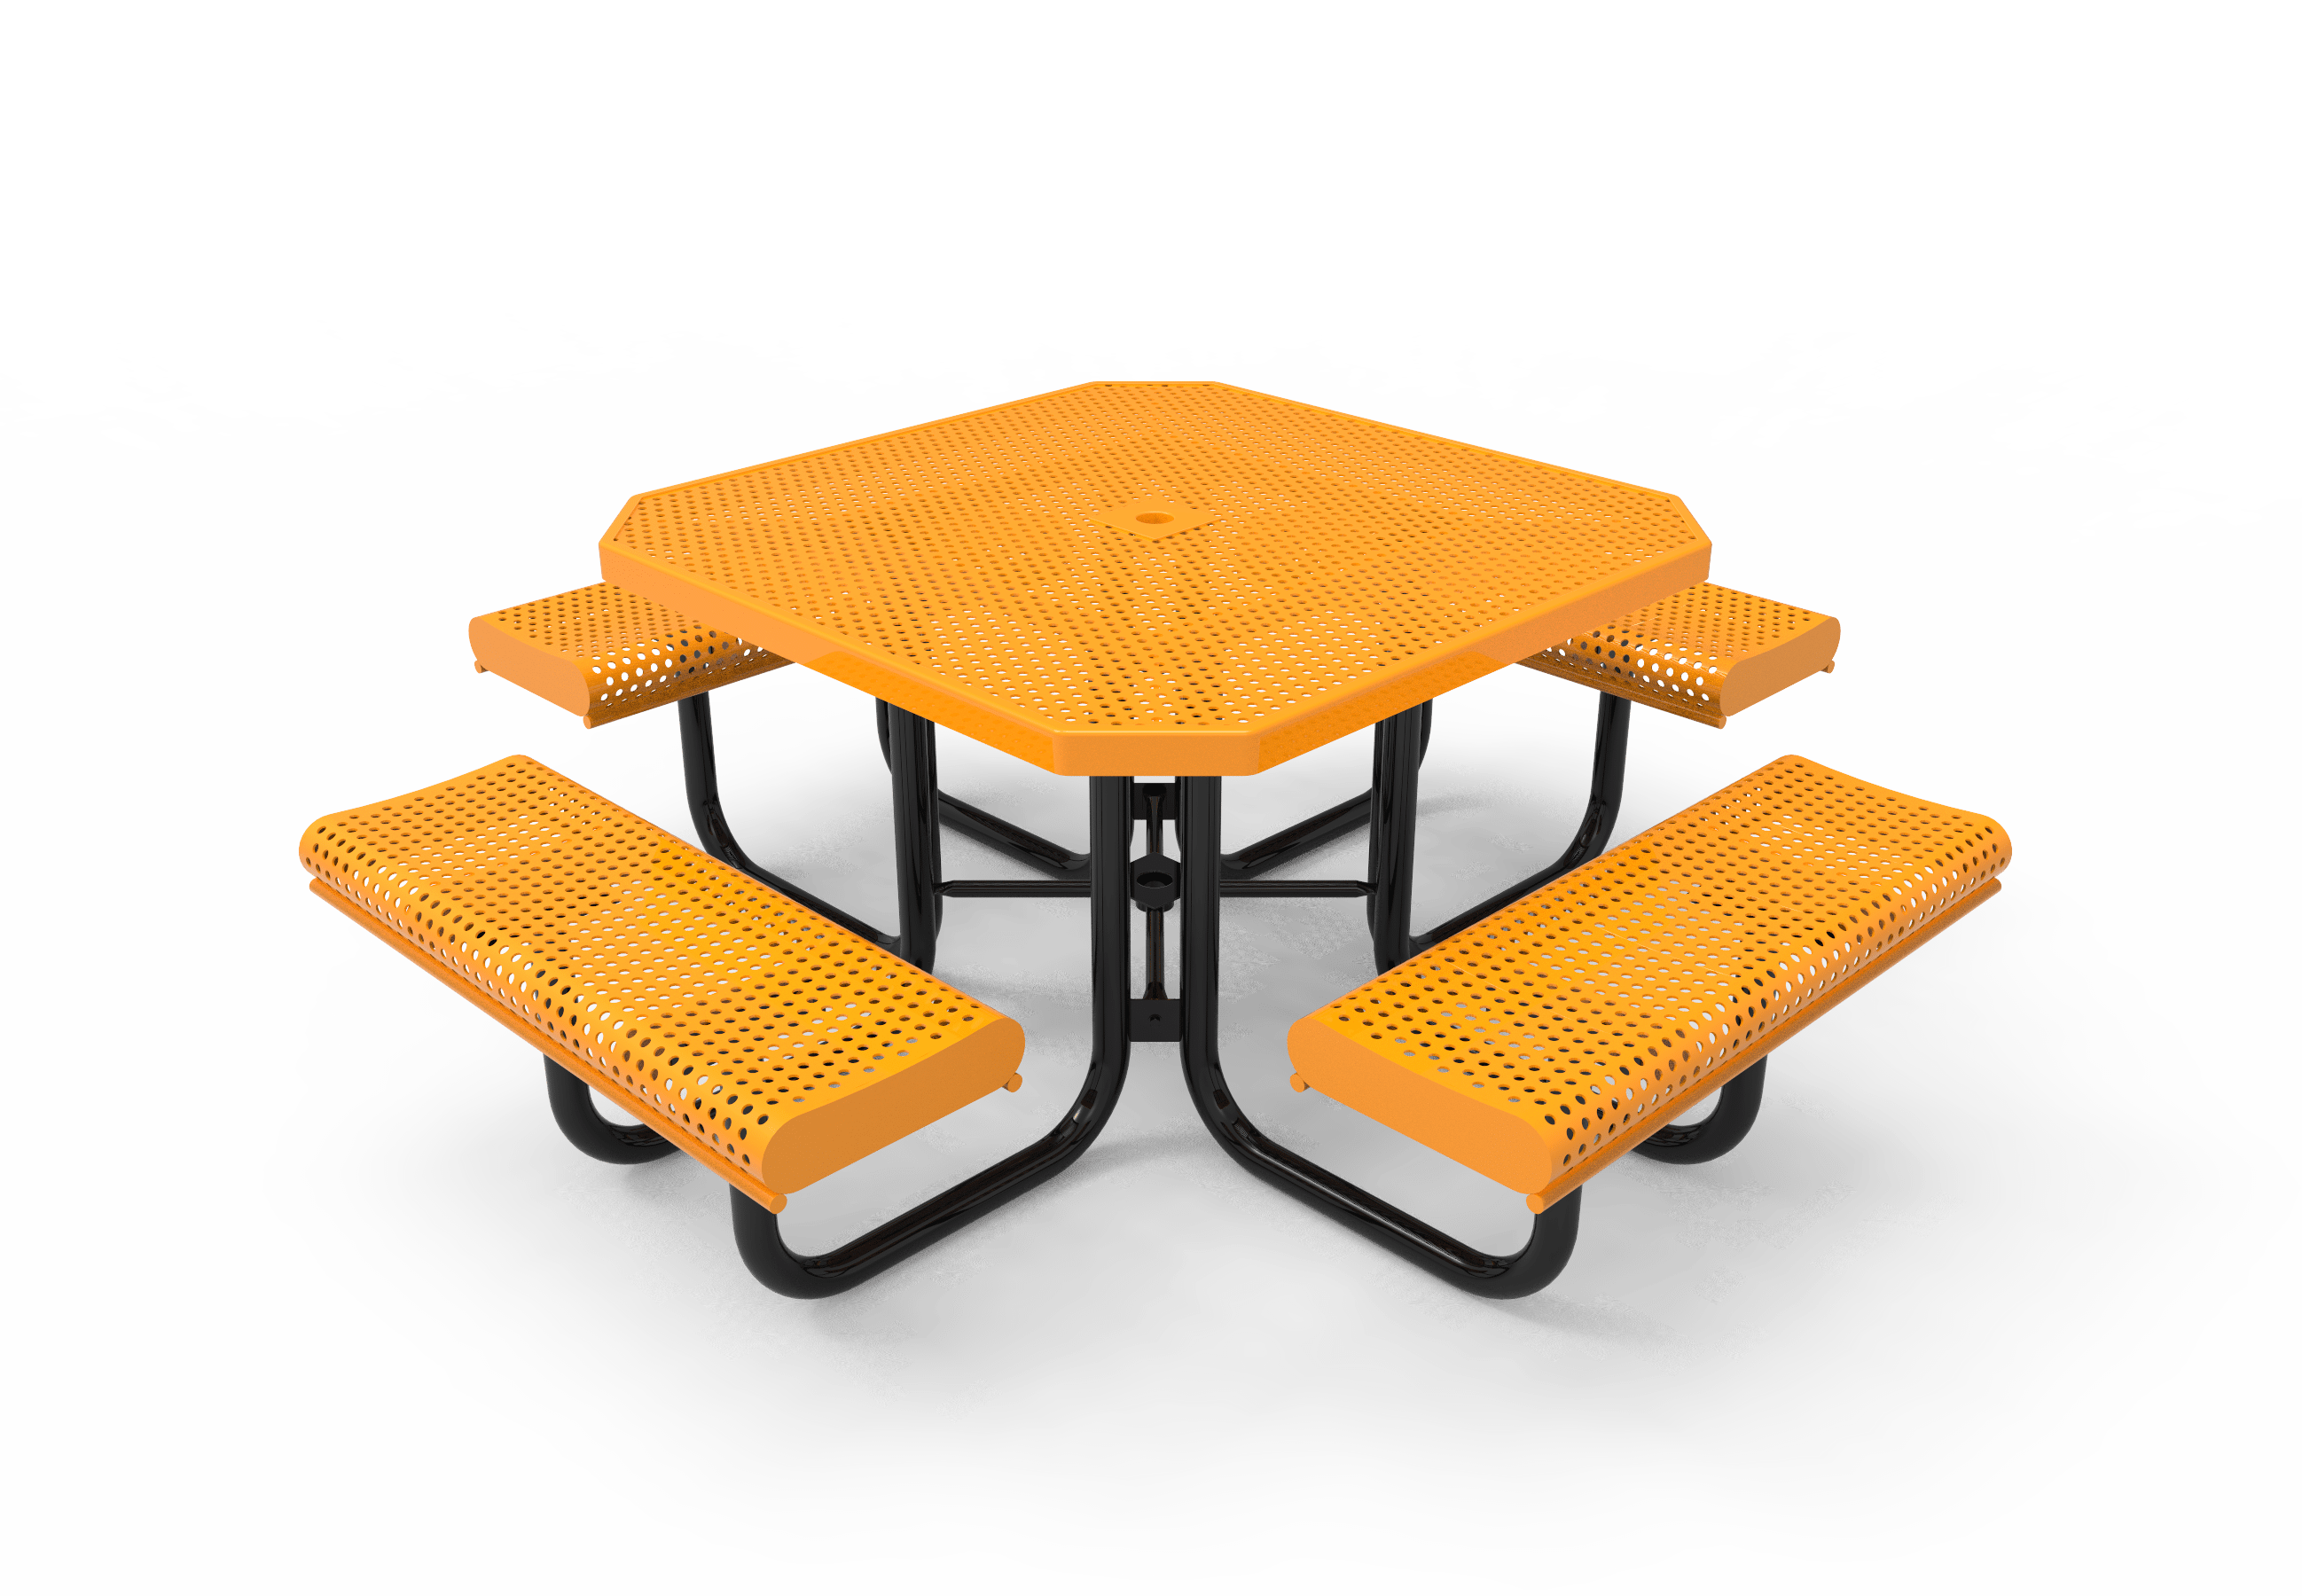 46″ Oct Picnic Table 4 Rolled Seats-Punched
TOR46-D-04-000
Industry Standard Finish
$1619.00
TOR46-B-04-000
Advantage Premium Finish
$1949.00
